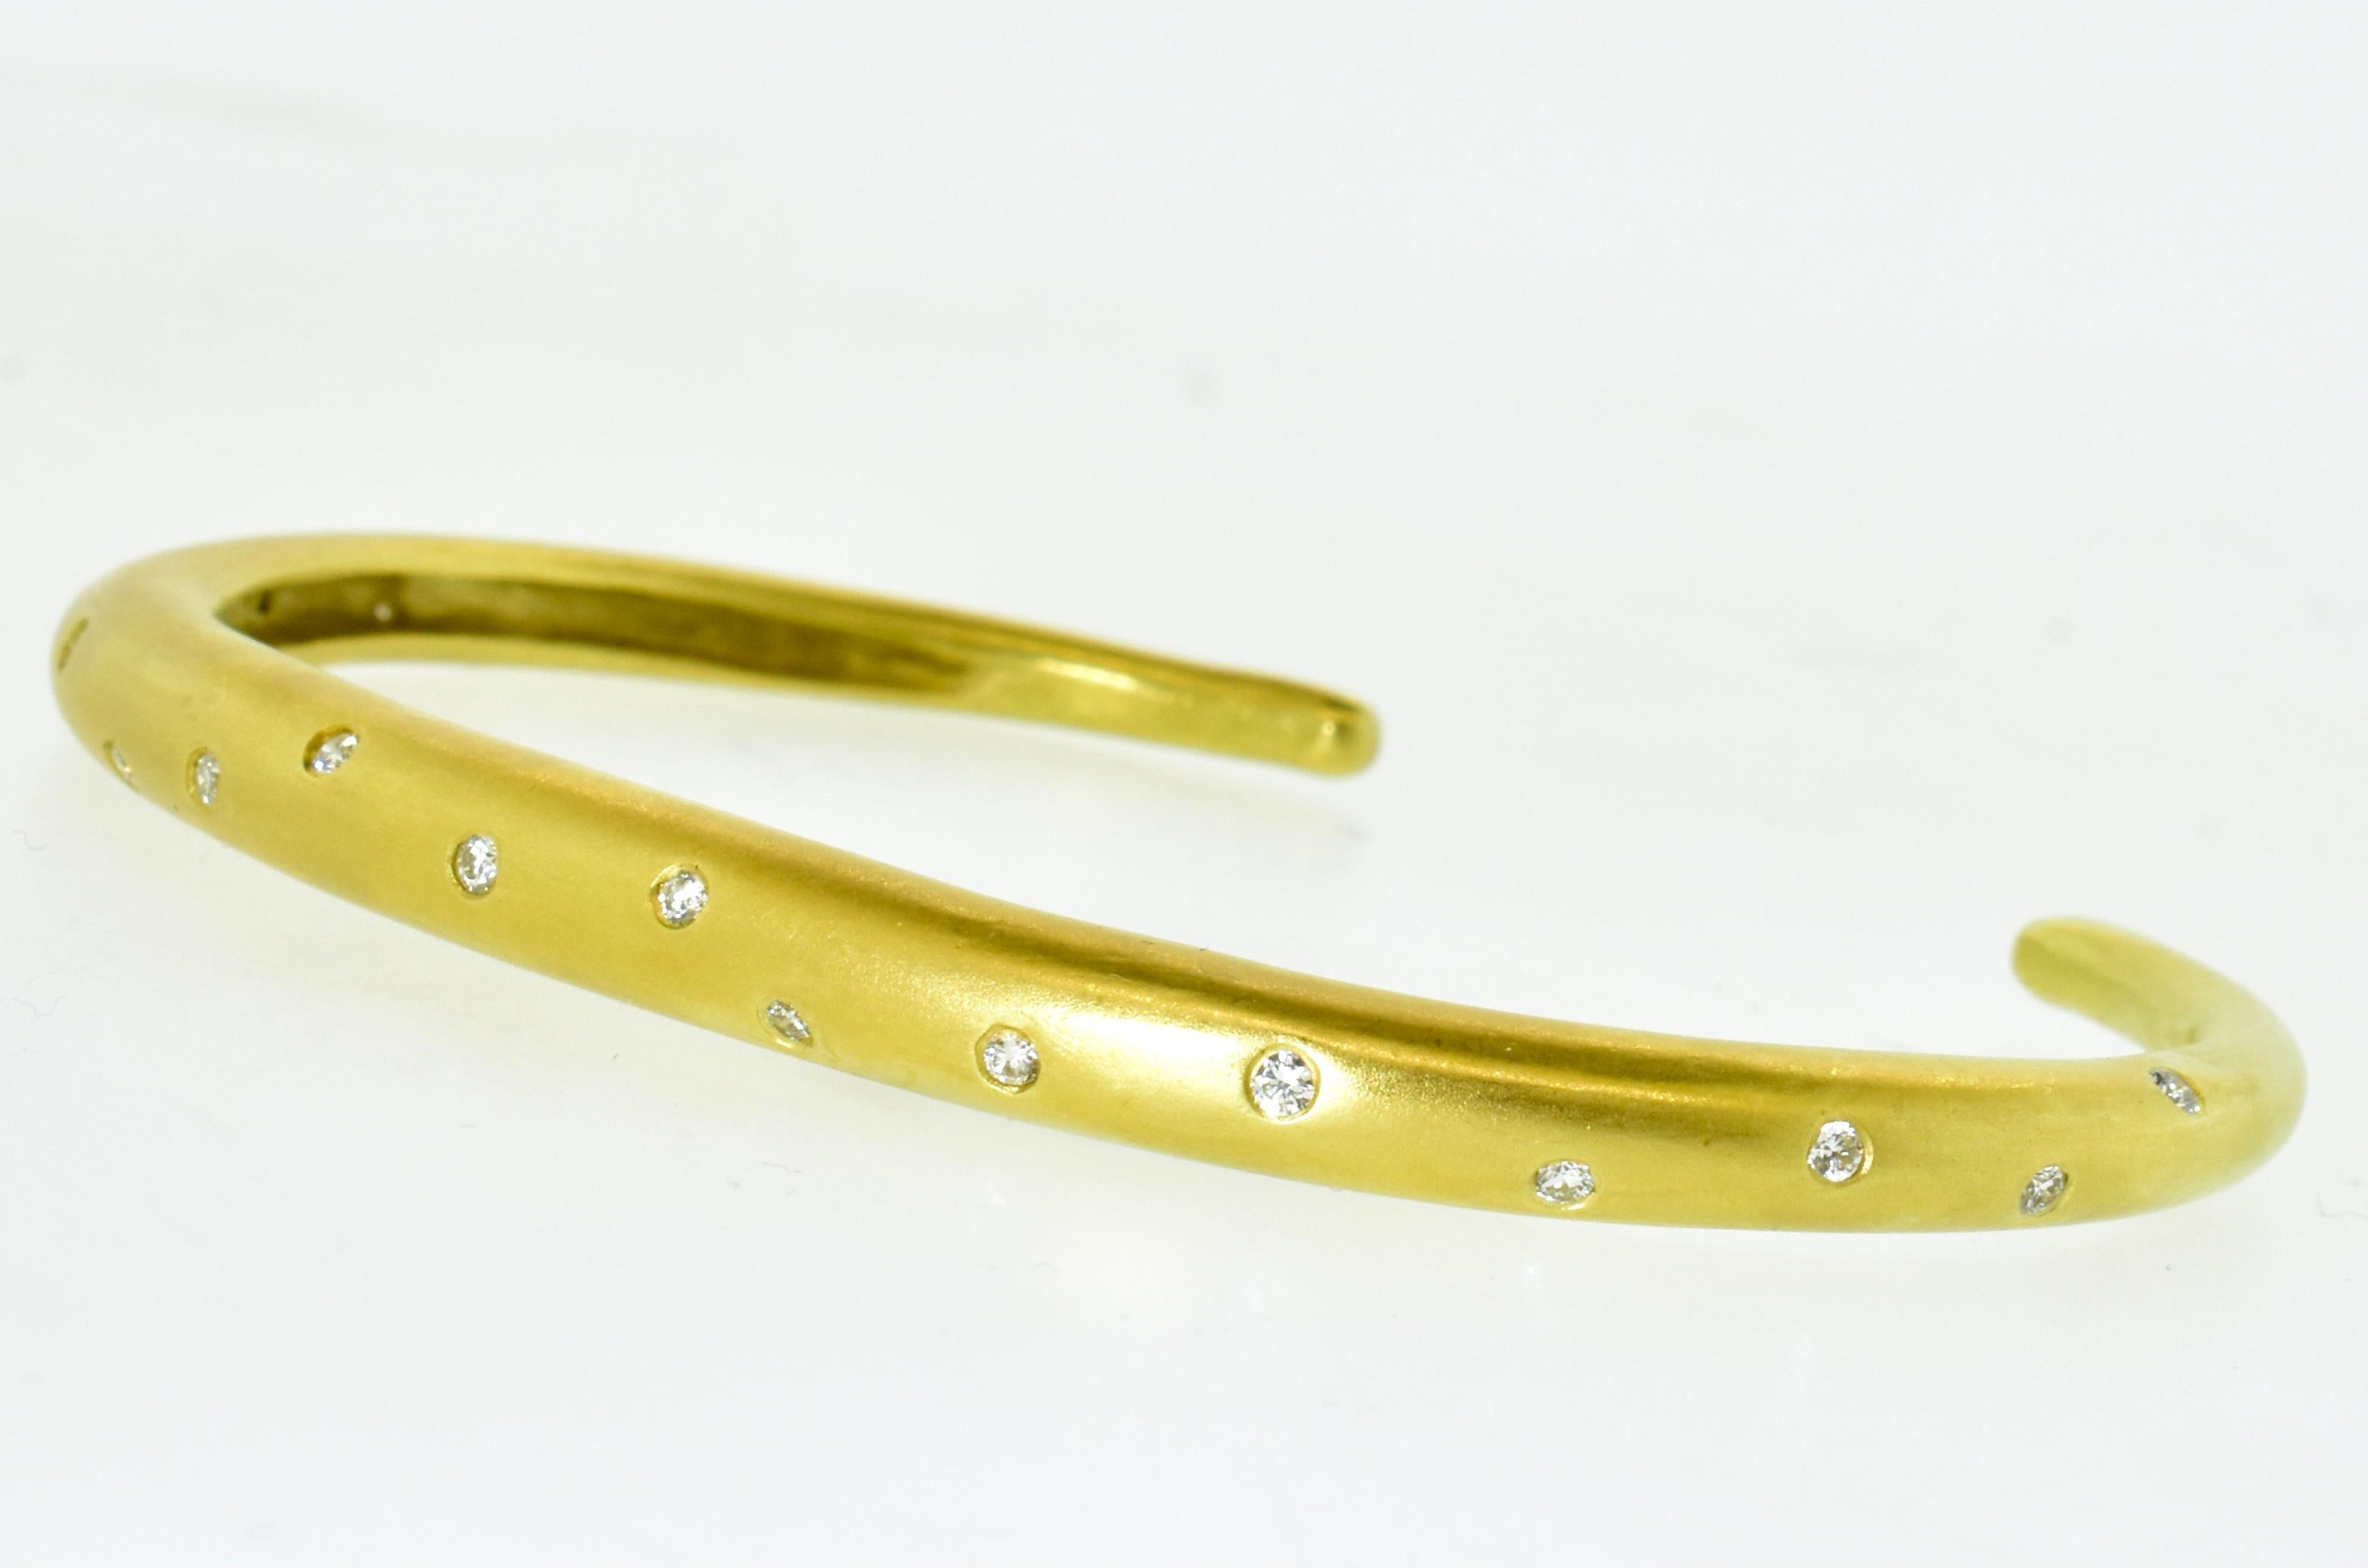 18K gold and diamond studded 3/4 solid bangle. This fine bracelet is not to be confused with a high weight piece made in a factory in a third world country, This is a hand made bangle is 5.0 to 2.5 mm which weighs 21.45 grams.  It possesses 17 round